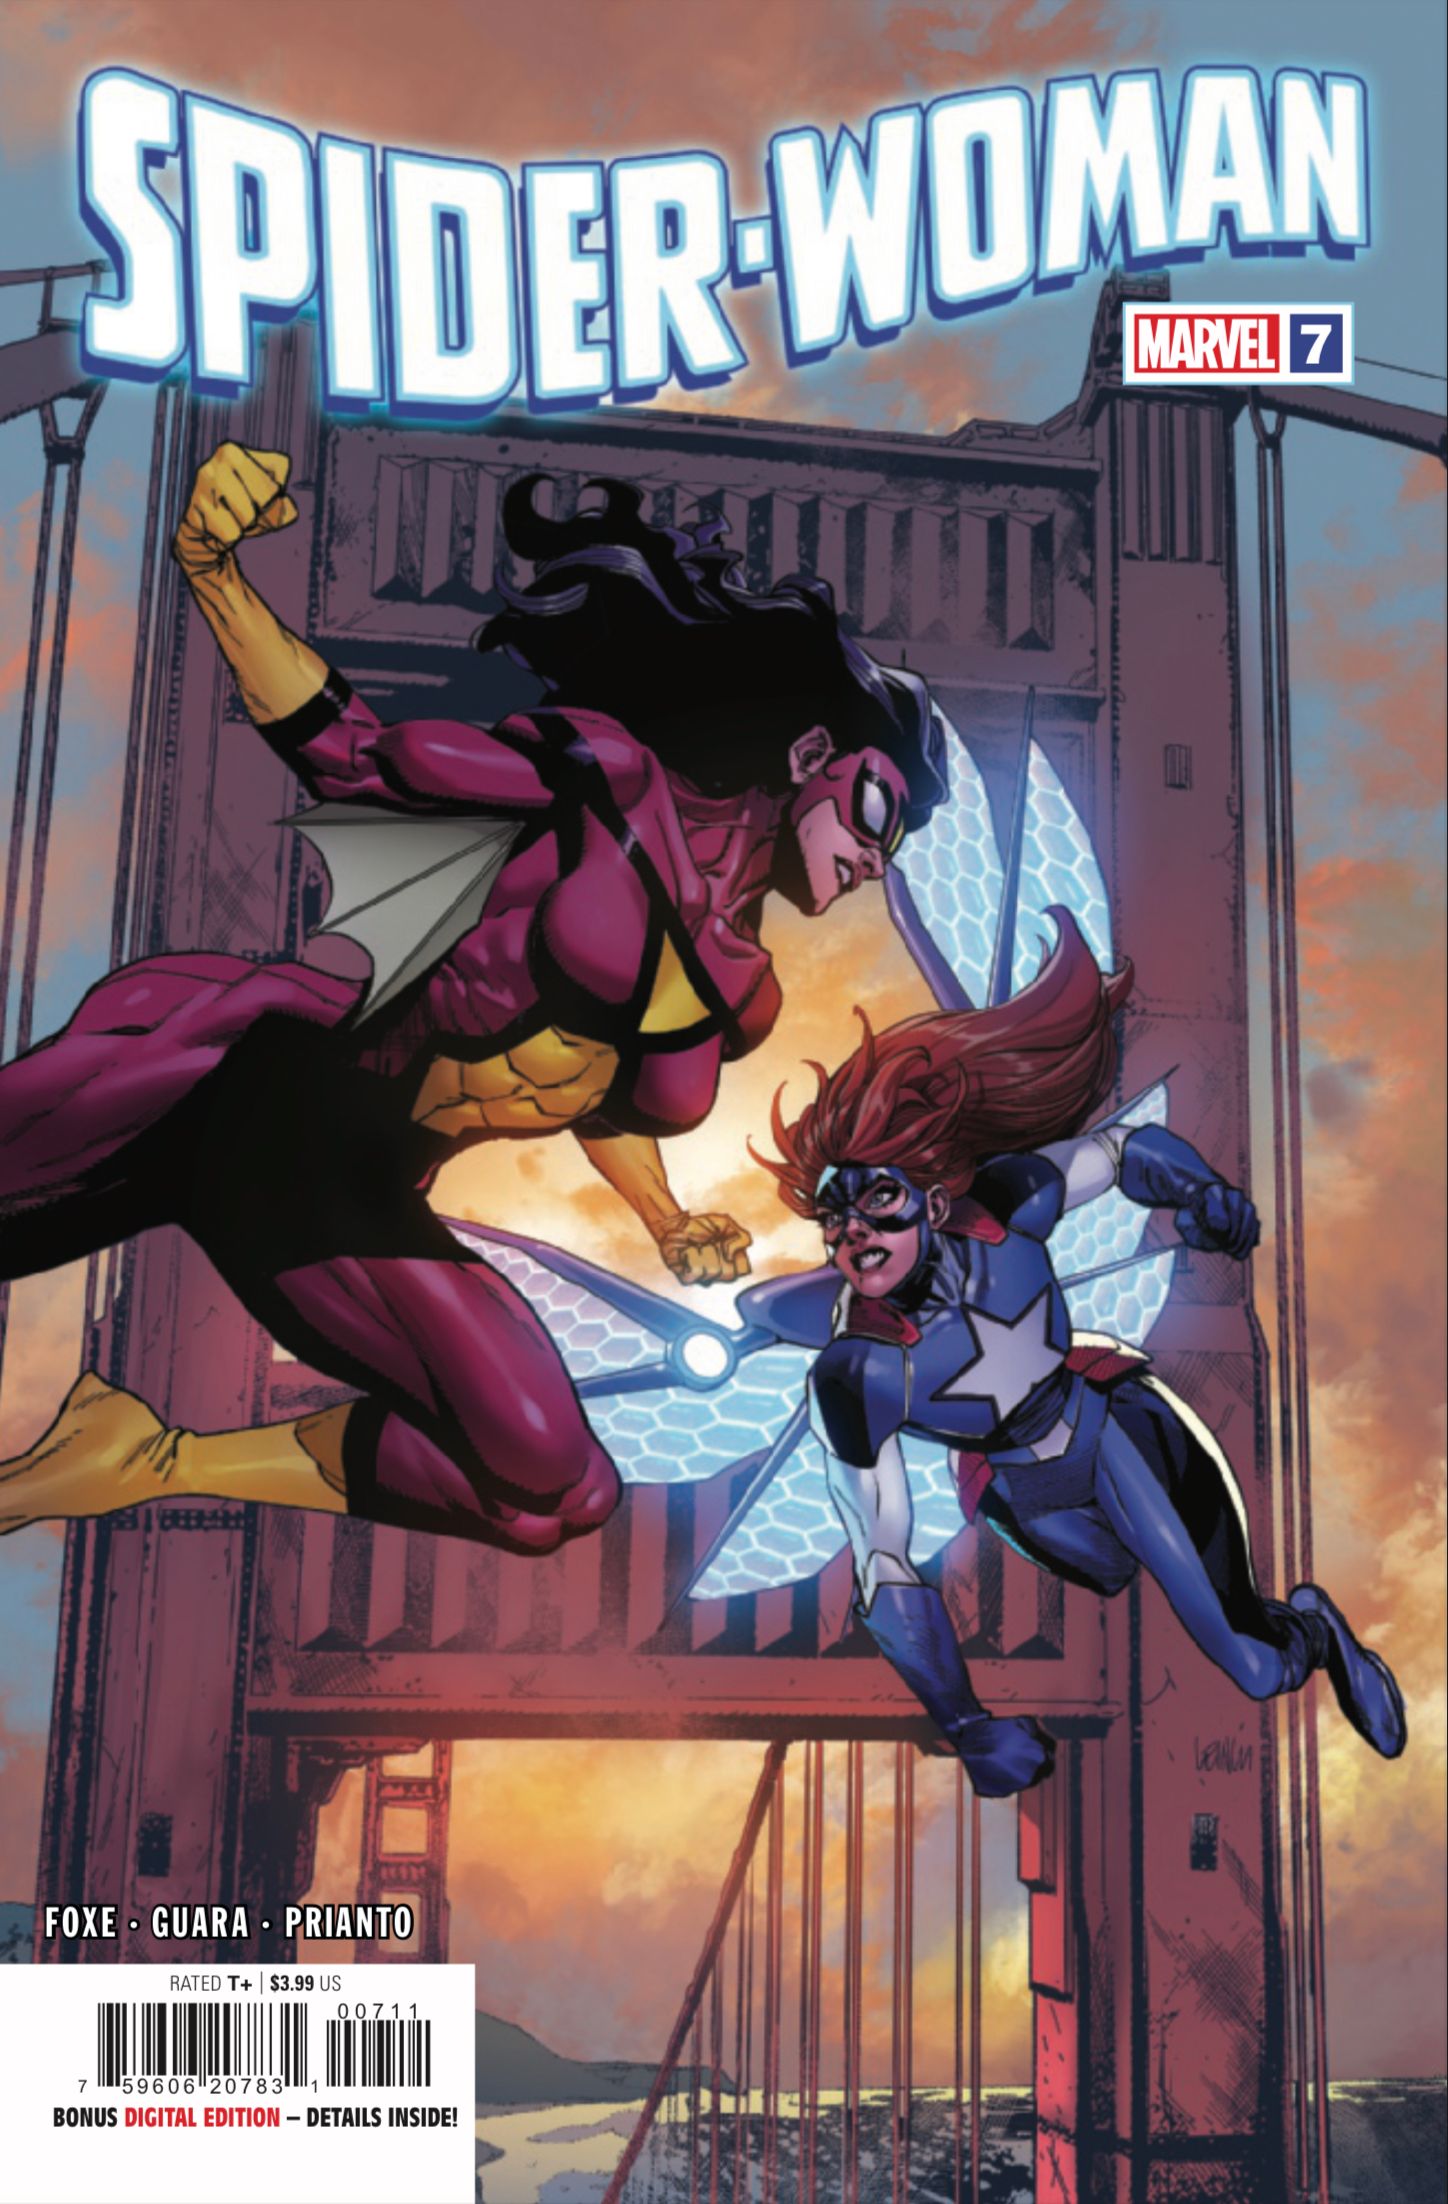 Spider Woman #7 cover by Leinil Francis Yu and Sunny Gho, Spider-Woman flying into a fight.